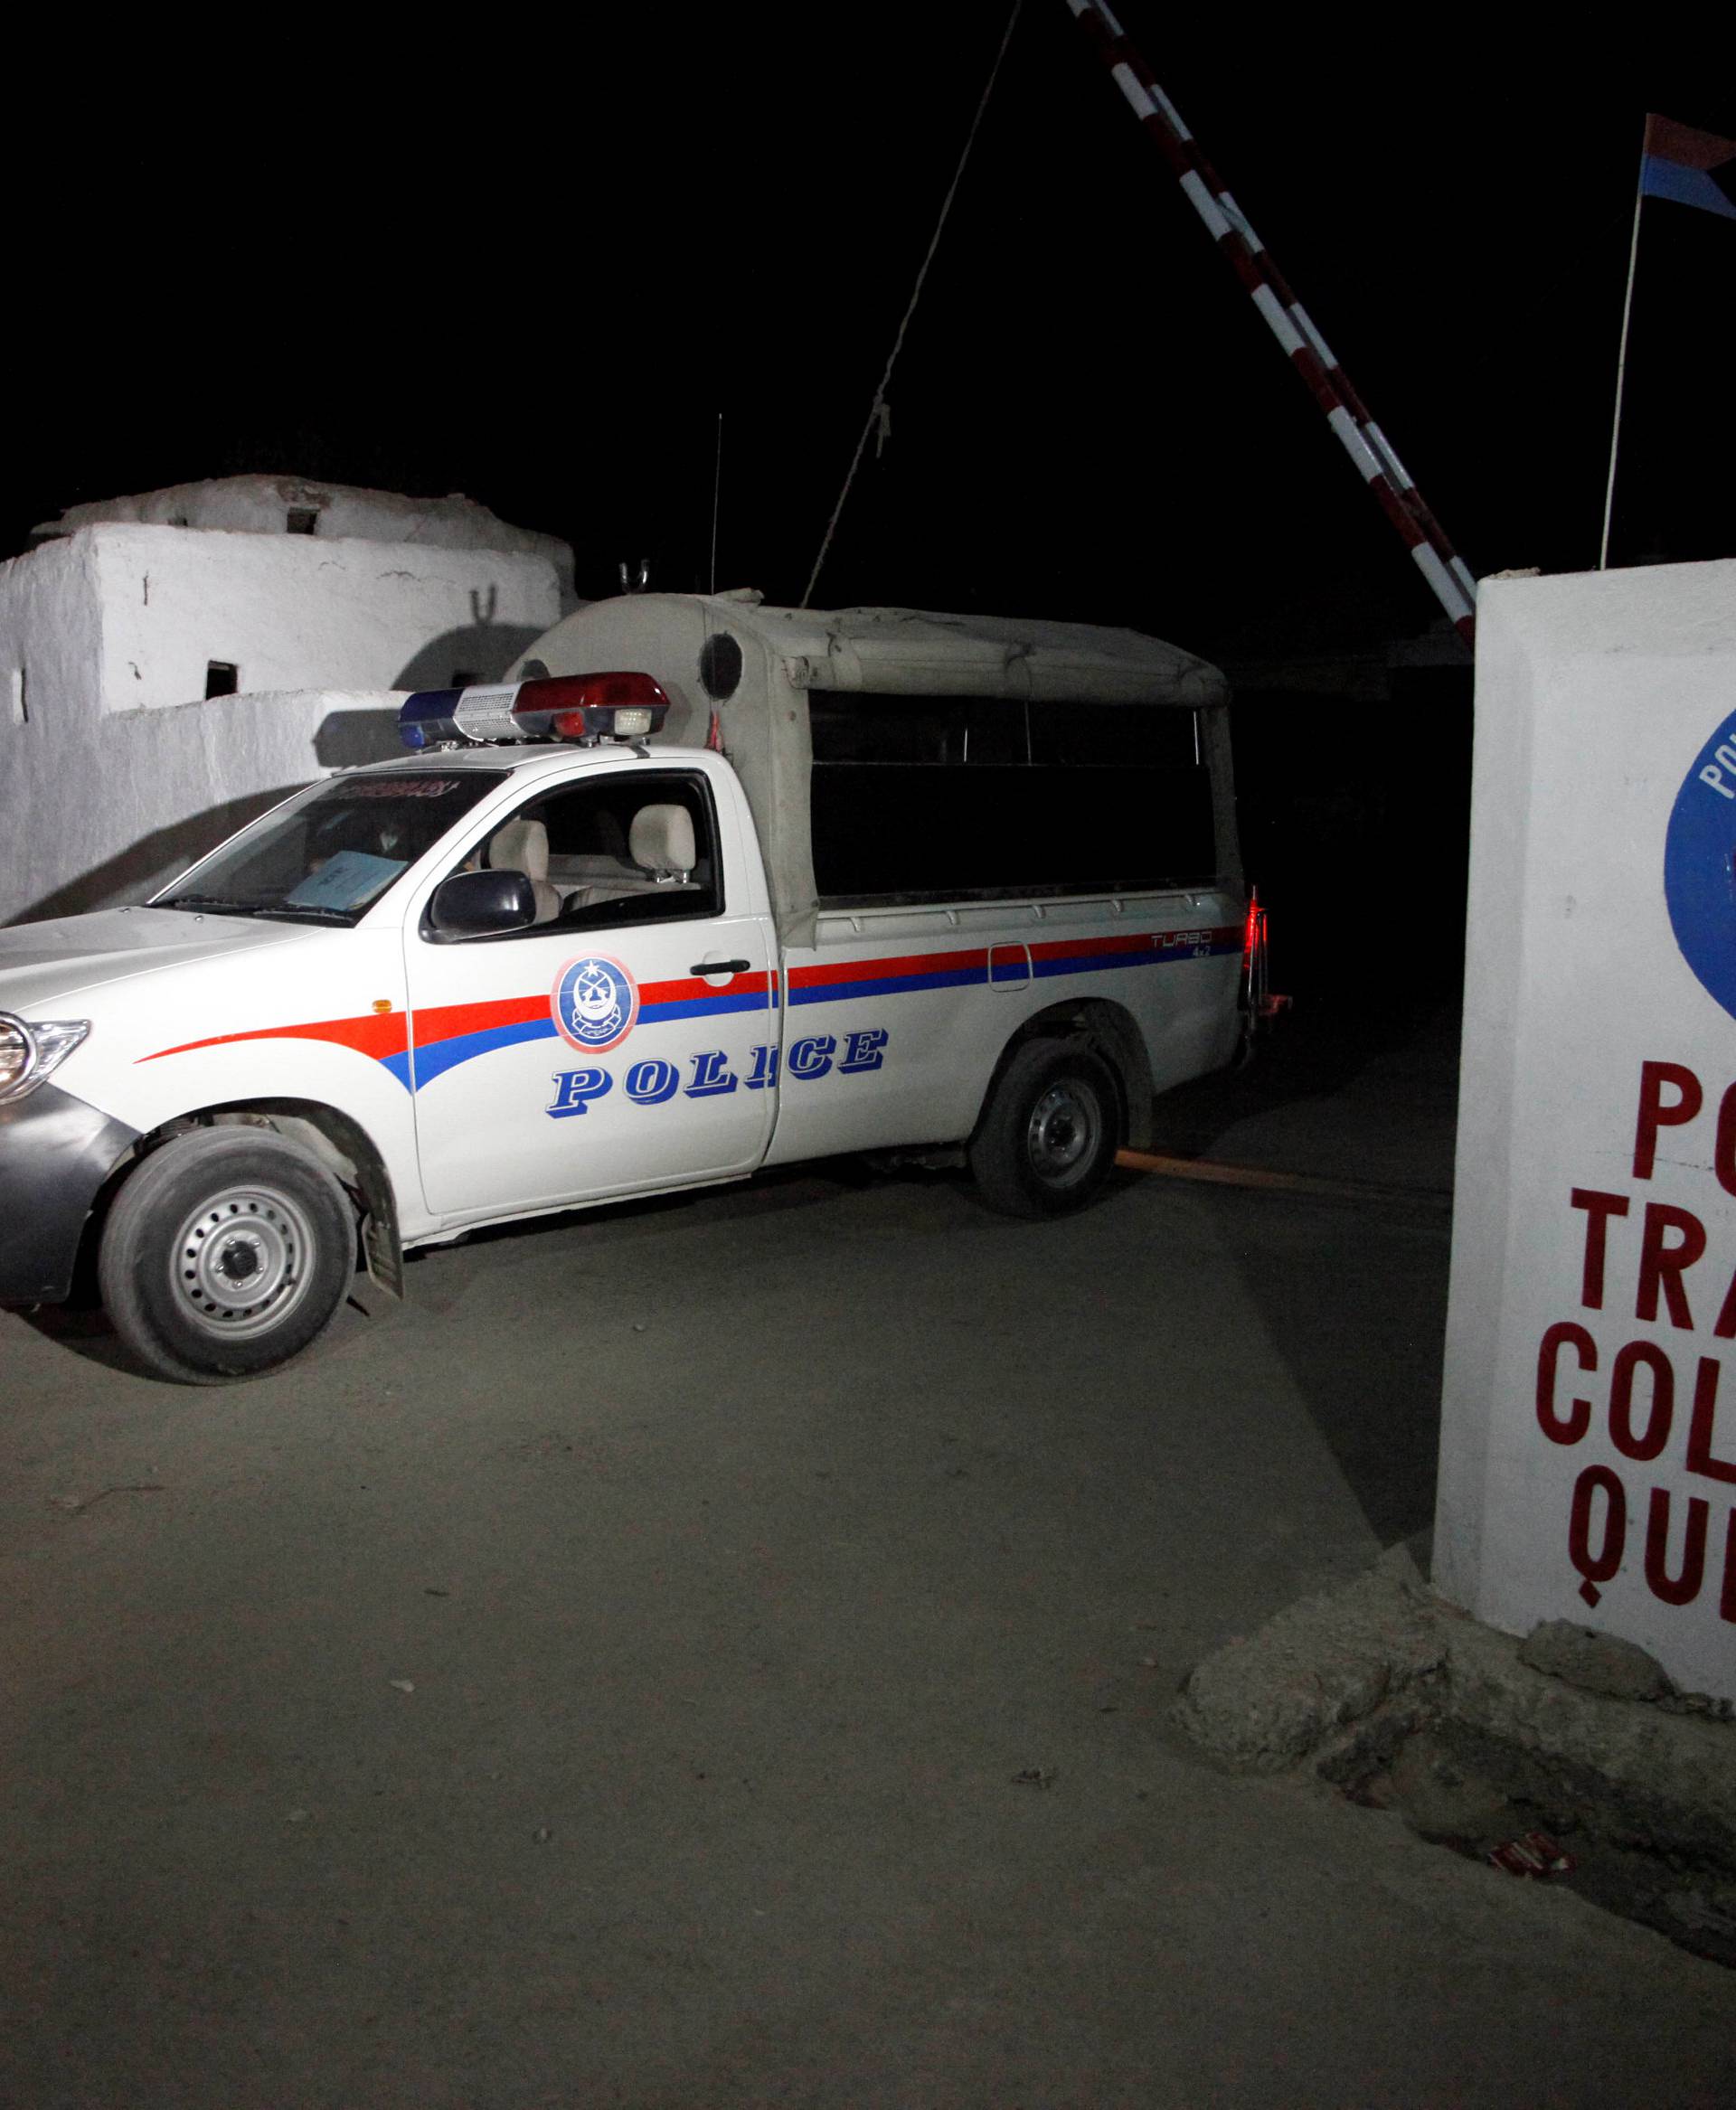 A police truck is seen at a gate to the Police Training Center after an attack on the center in Quetta